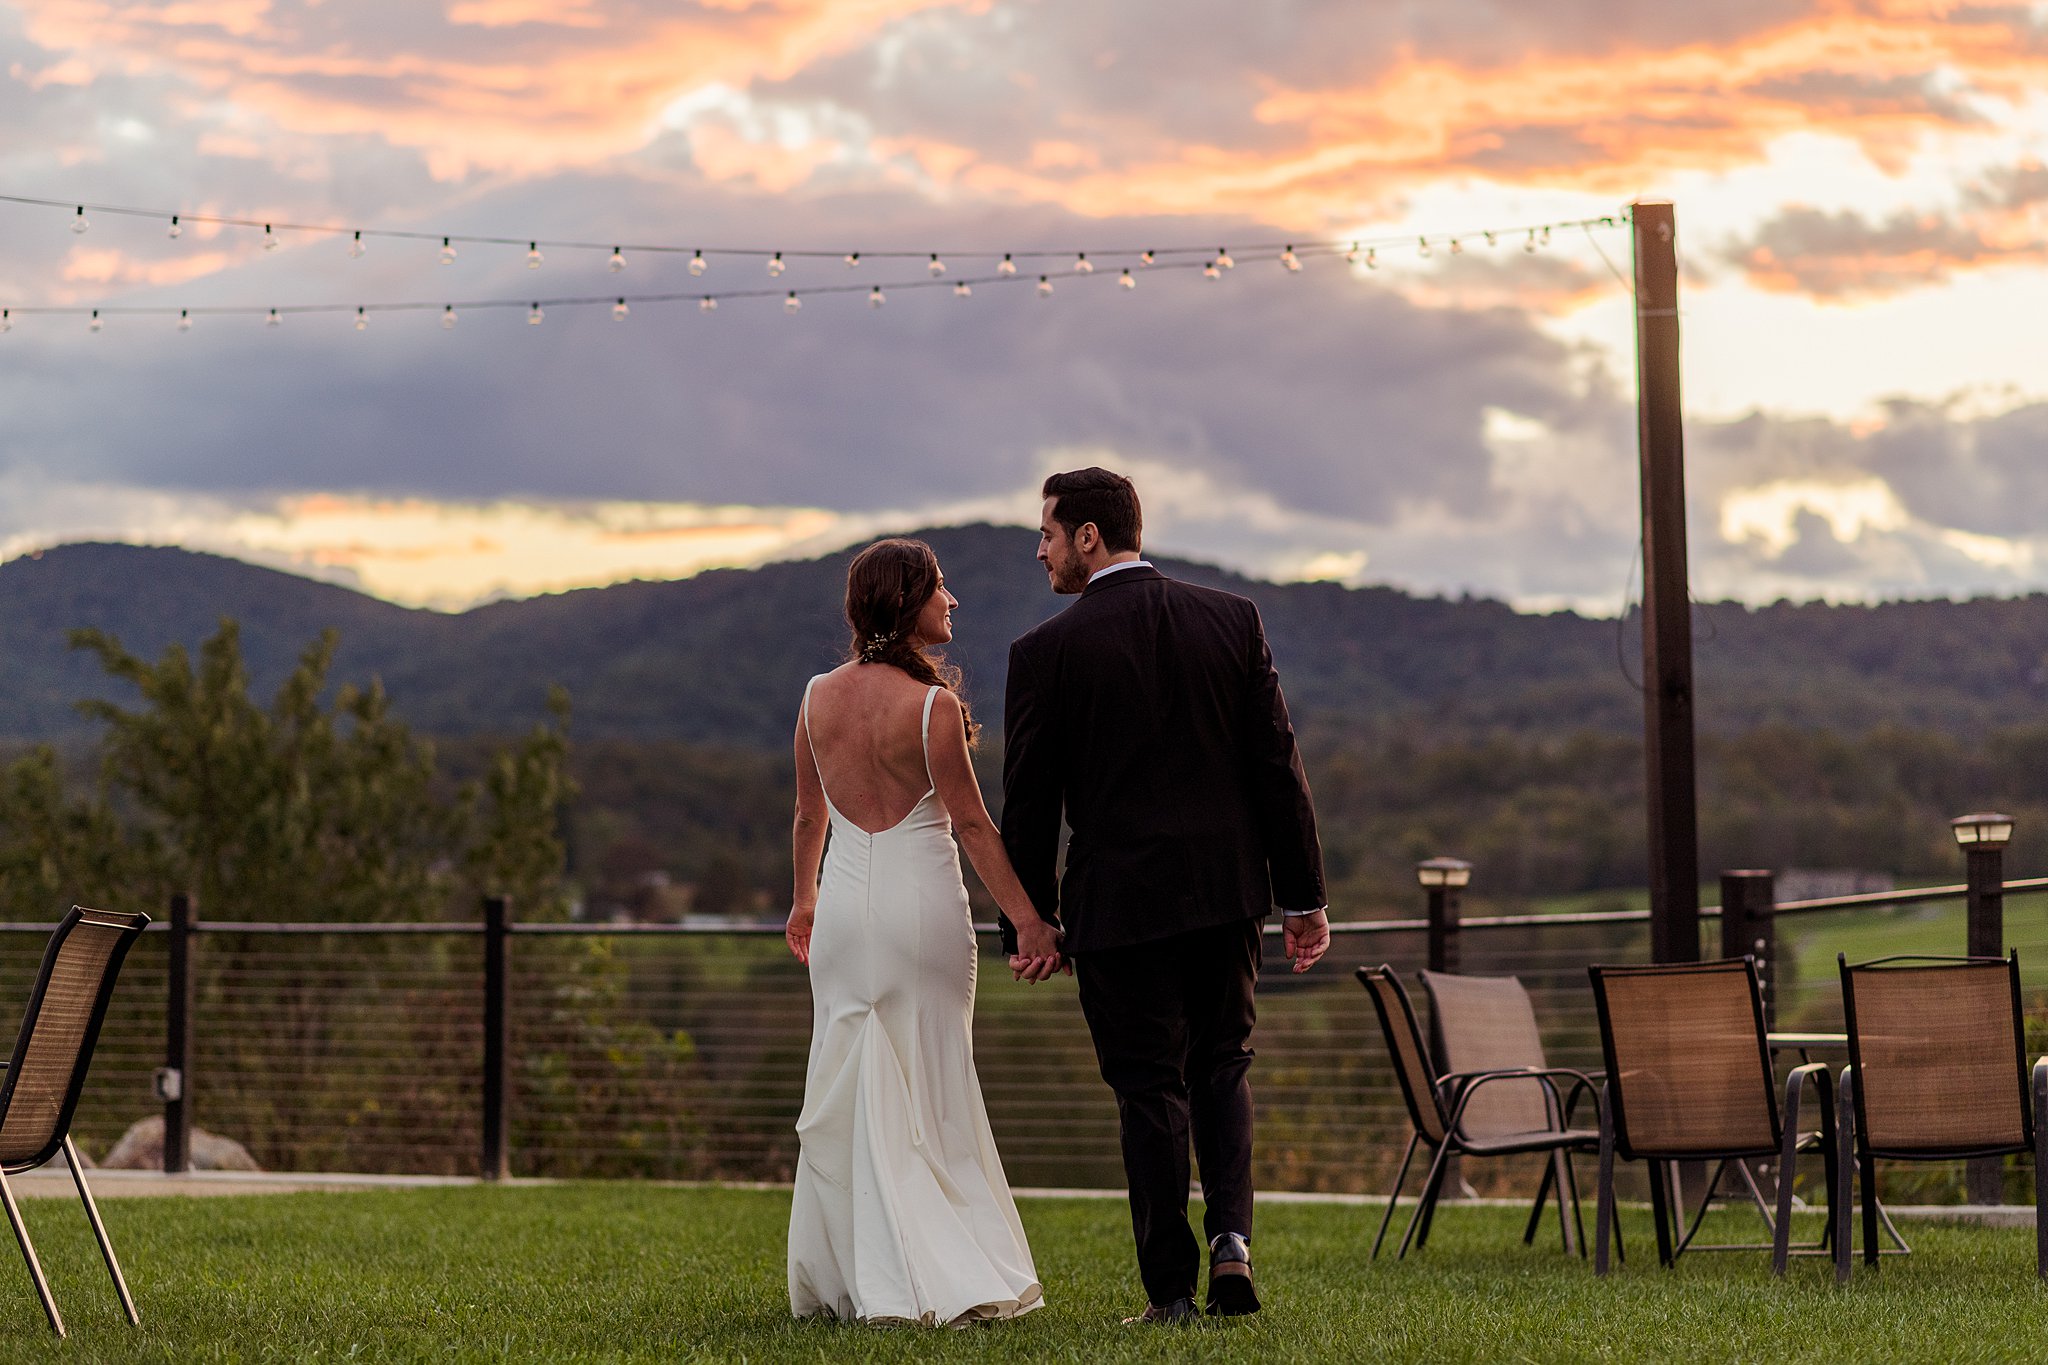 Newlyweds hold hands while looking at each other on a lawn with chairs and a mountain sunset in the background wedding venues in northern virginia